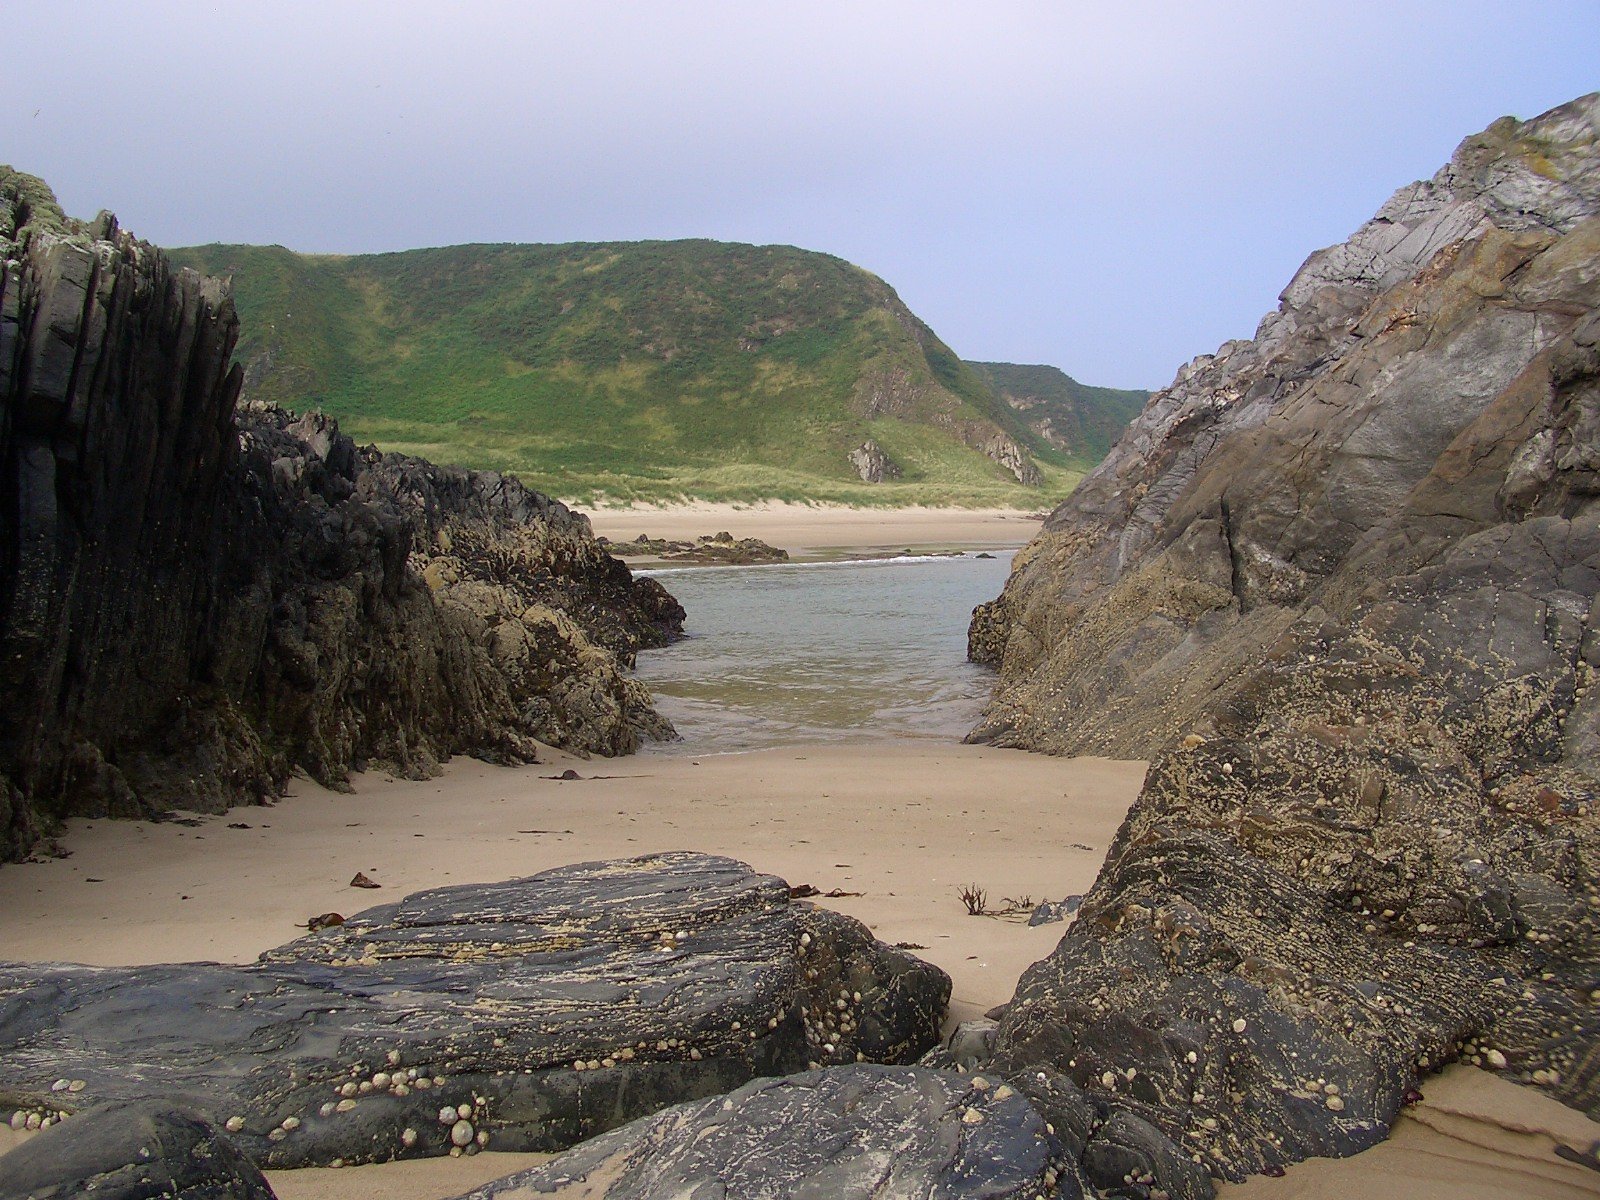 the rocky area features several different rocks on the beach